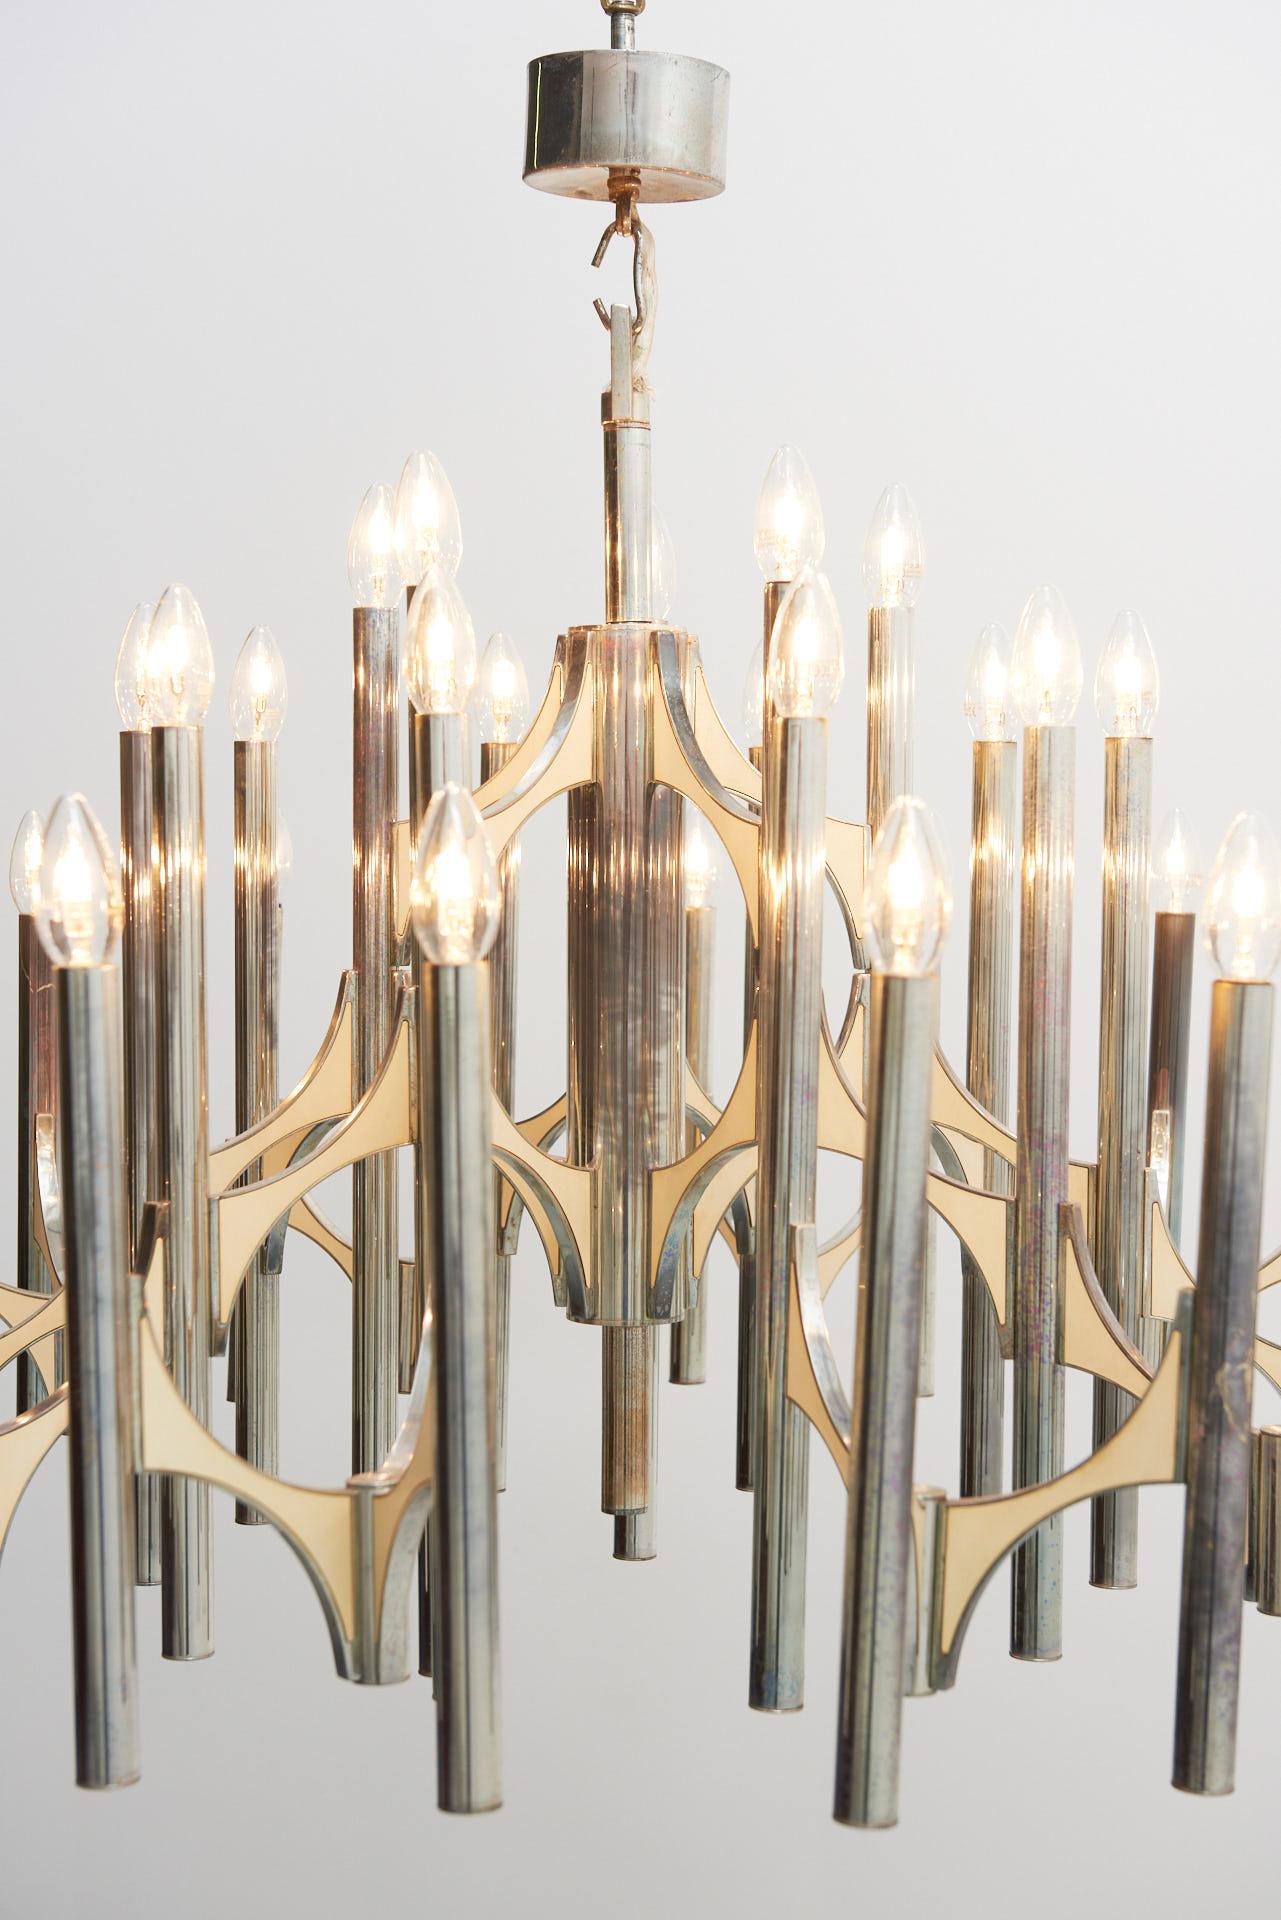 A large Italian chandelier from the 1970s designed by Gaetano Sciolari. Chrome plated brass with cream metal panels are holding the 35 light bulbs that are linked to each other and placed around a central rod.